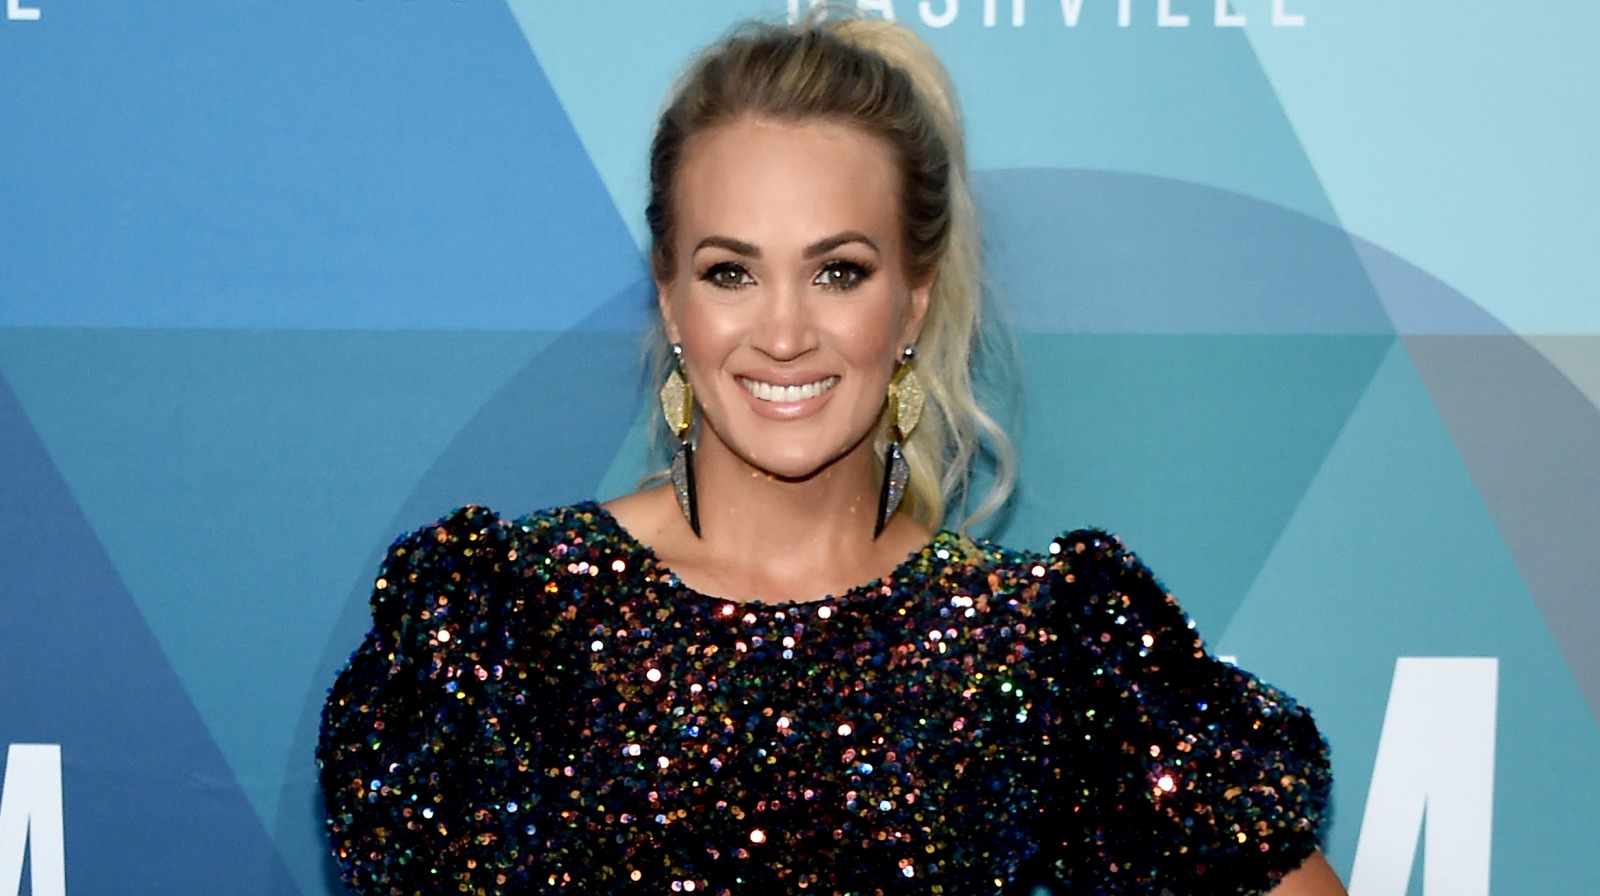 Carrie Underwood's Transformation From 'American Idol' to Now